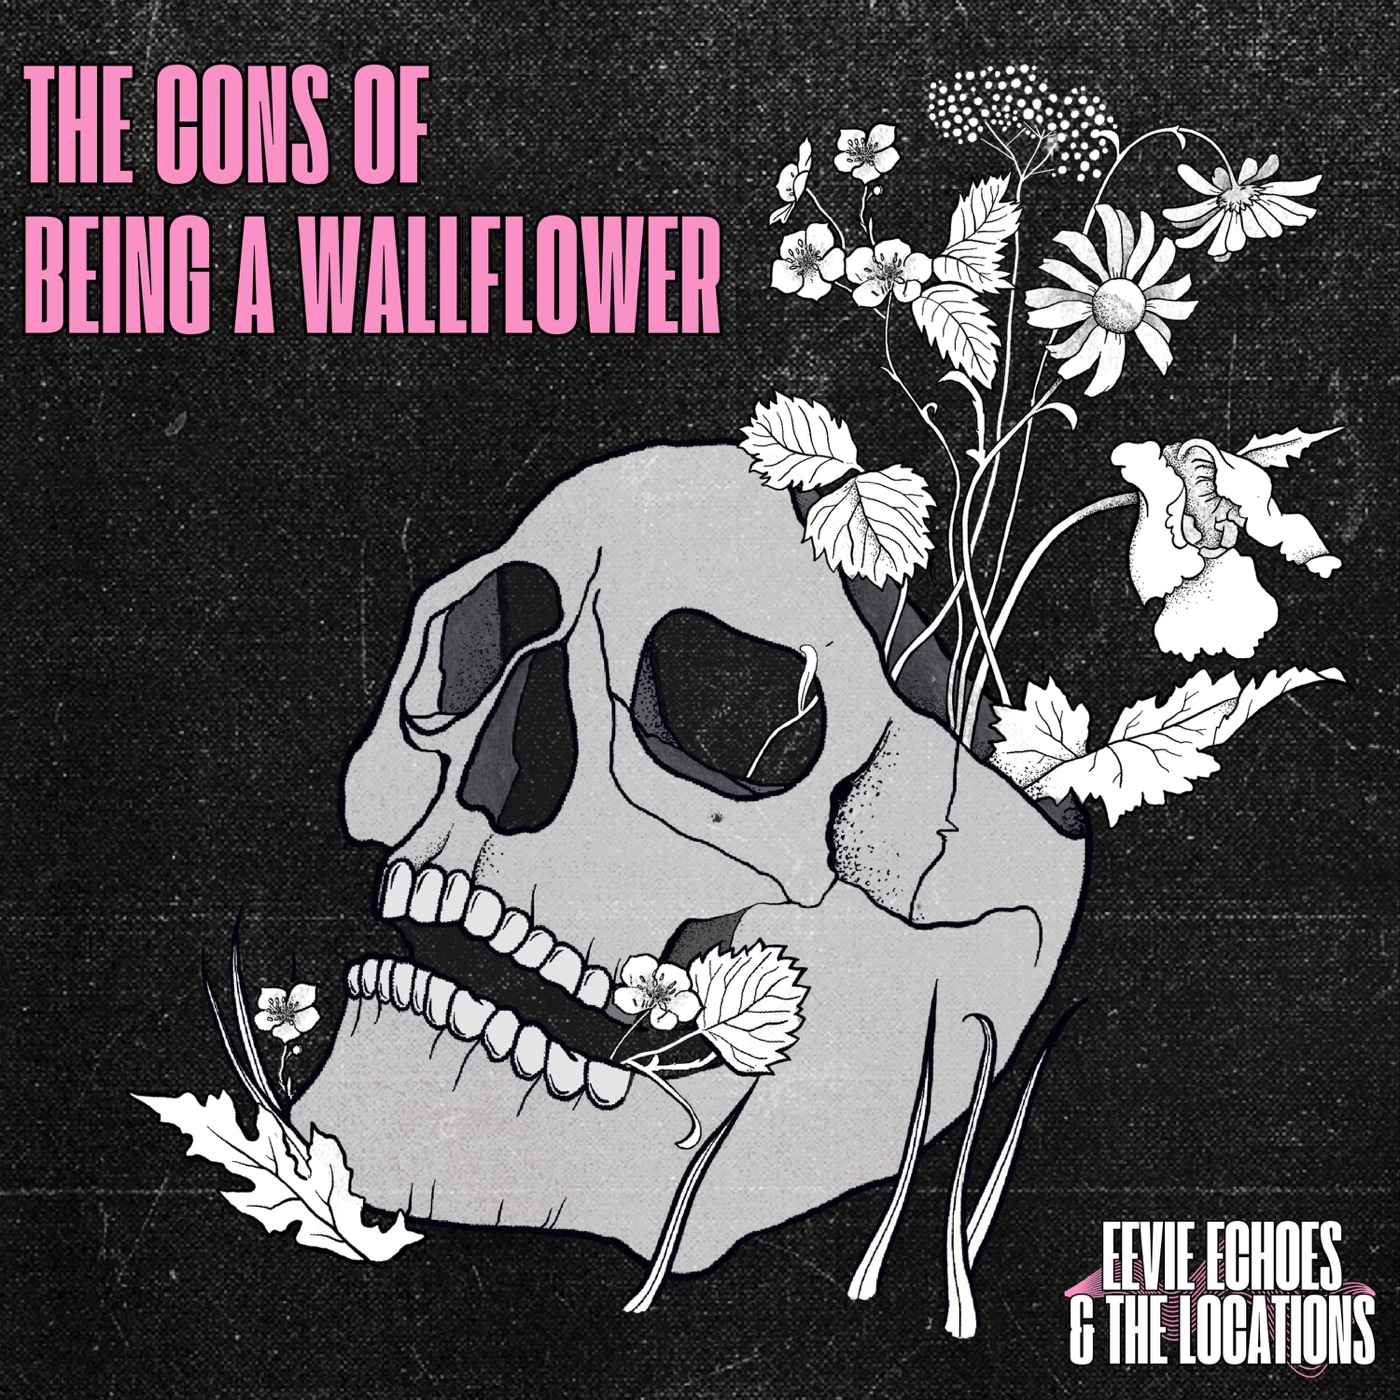 The Cons of Being a Wallflower by eevie echoes, The Locations